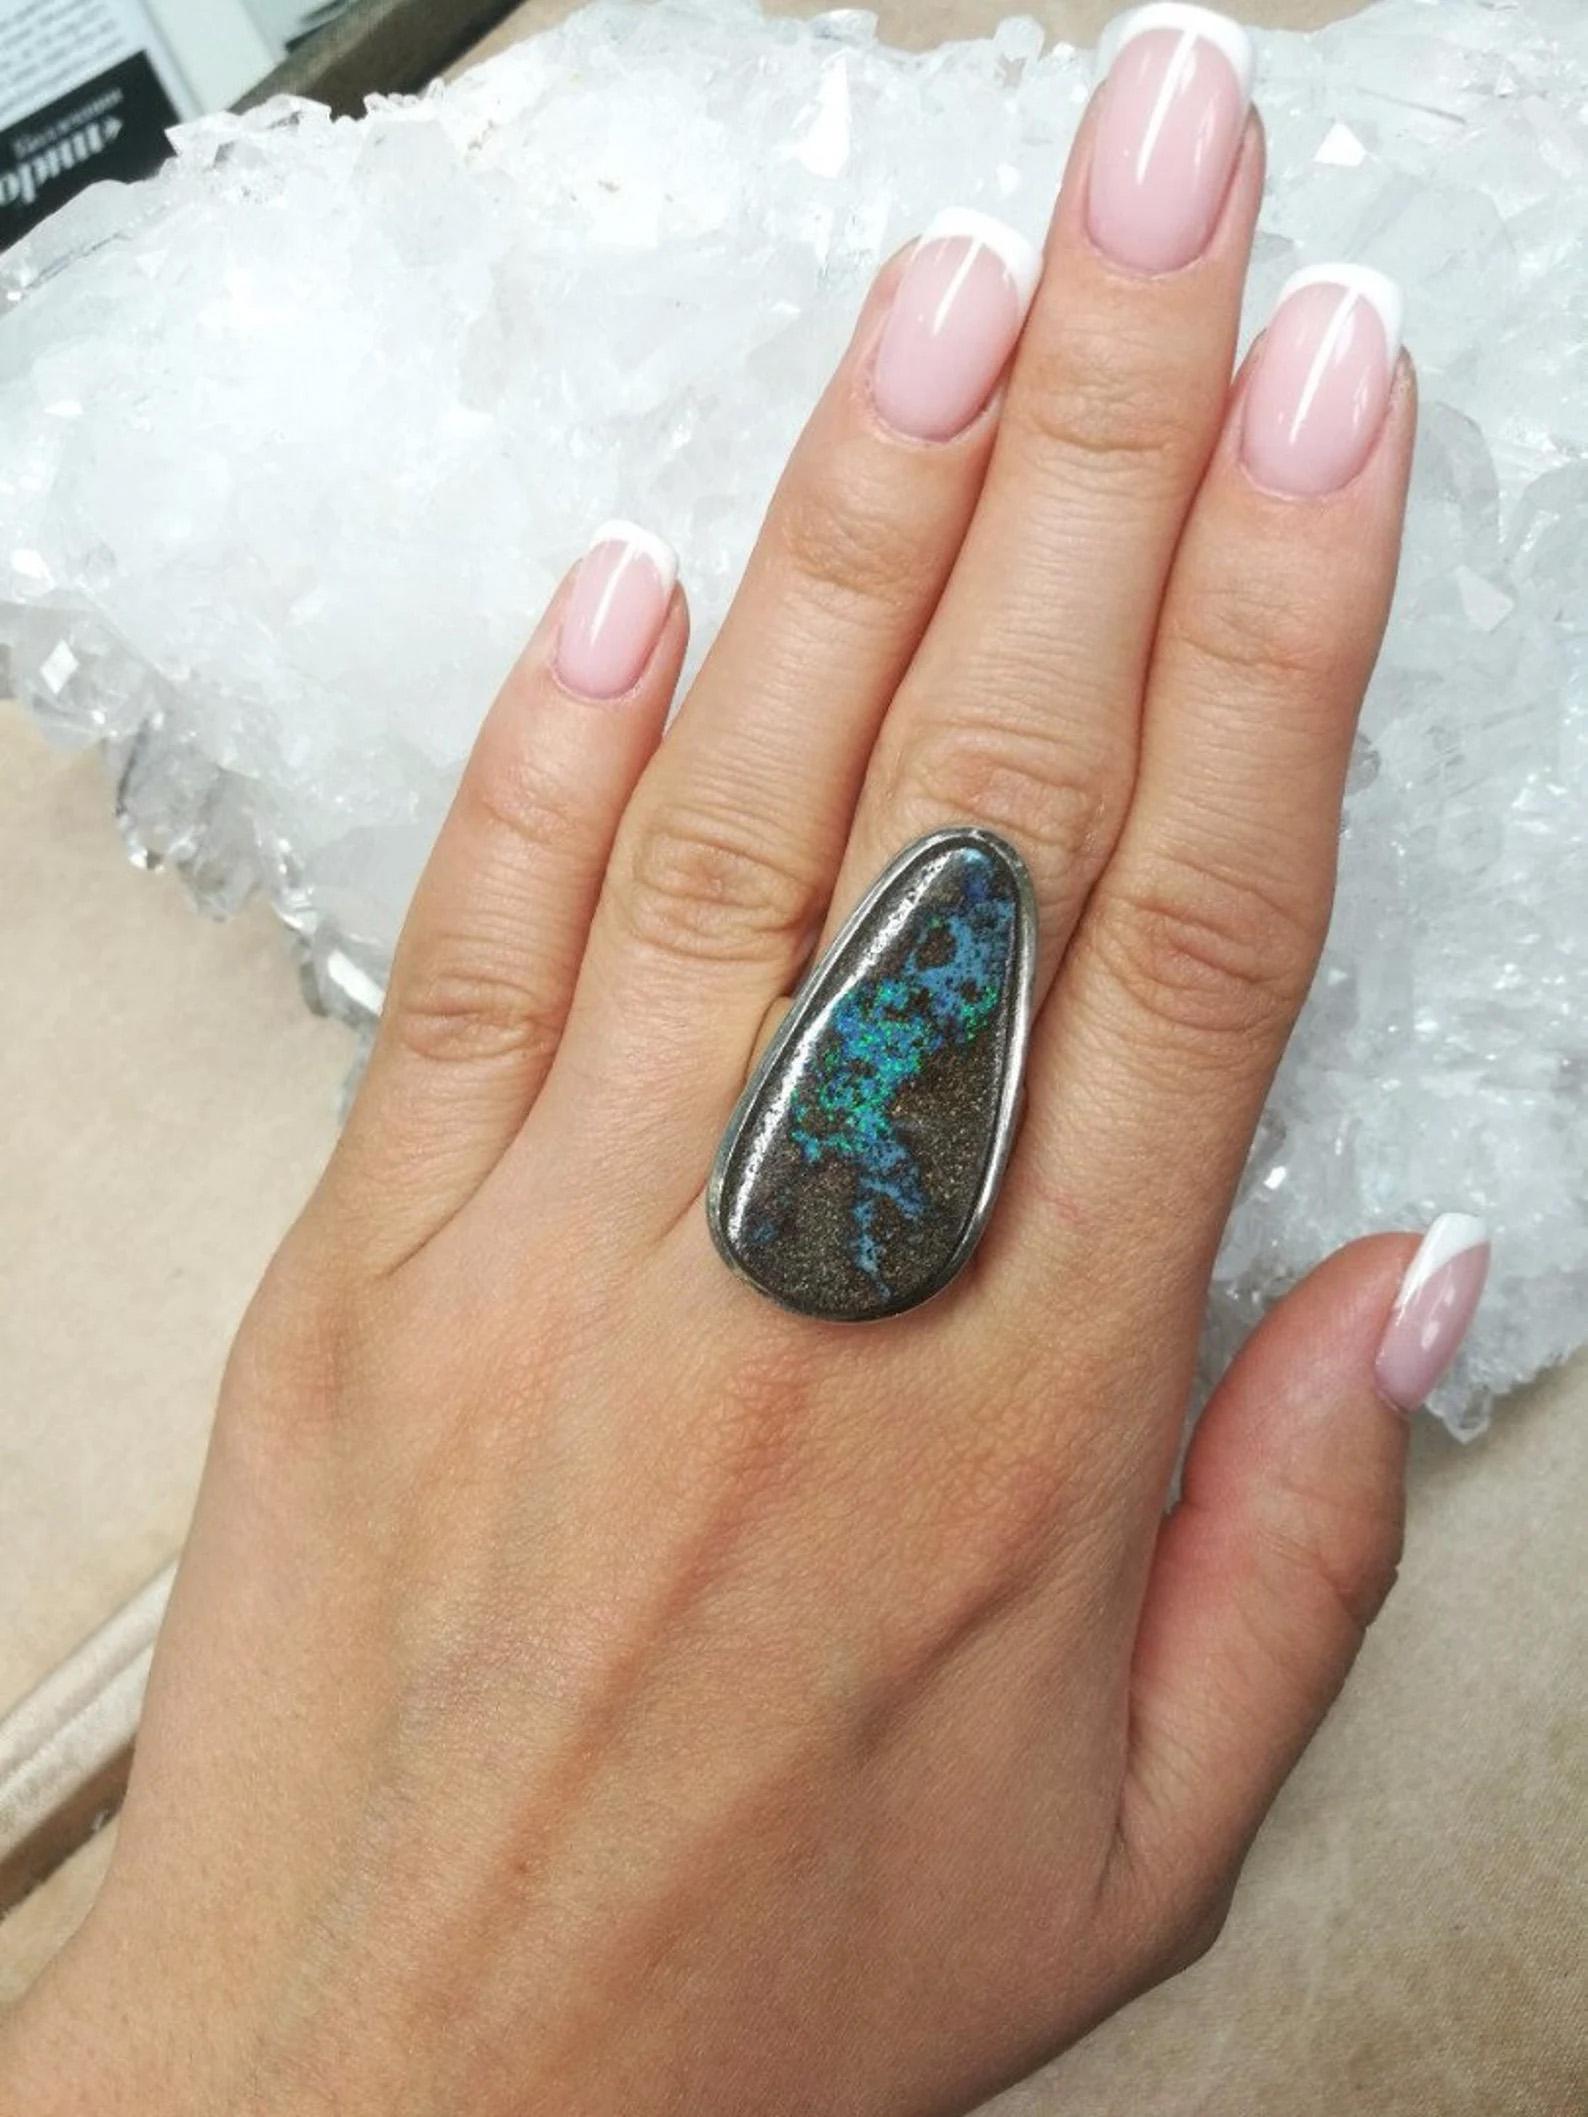 Pear Cut Big Boulder Opal Silver Ring Chunky Cabochon Turquoise Blue Brown Gemstone